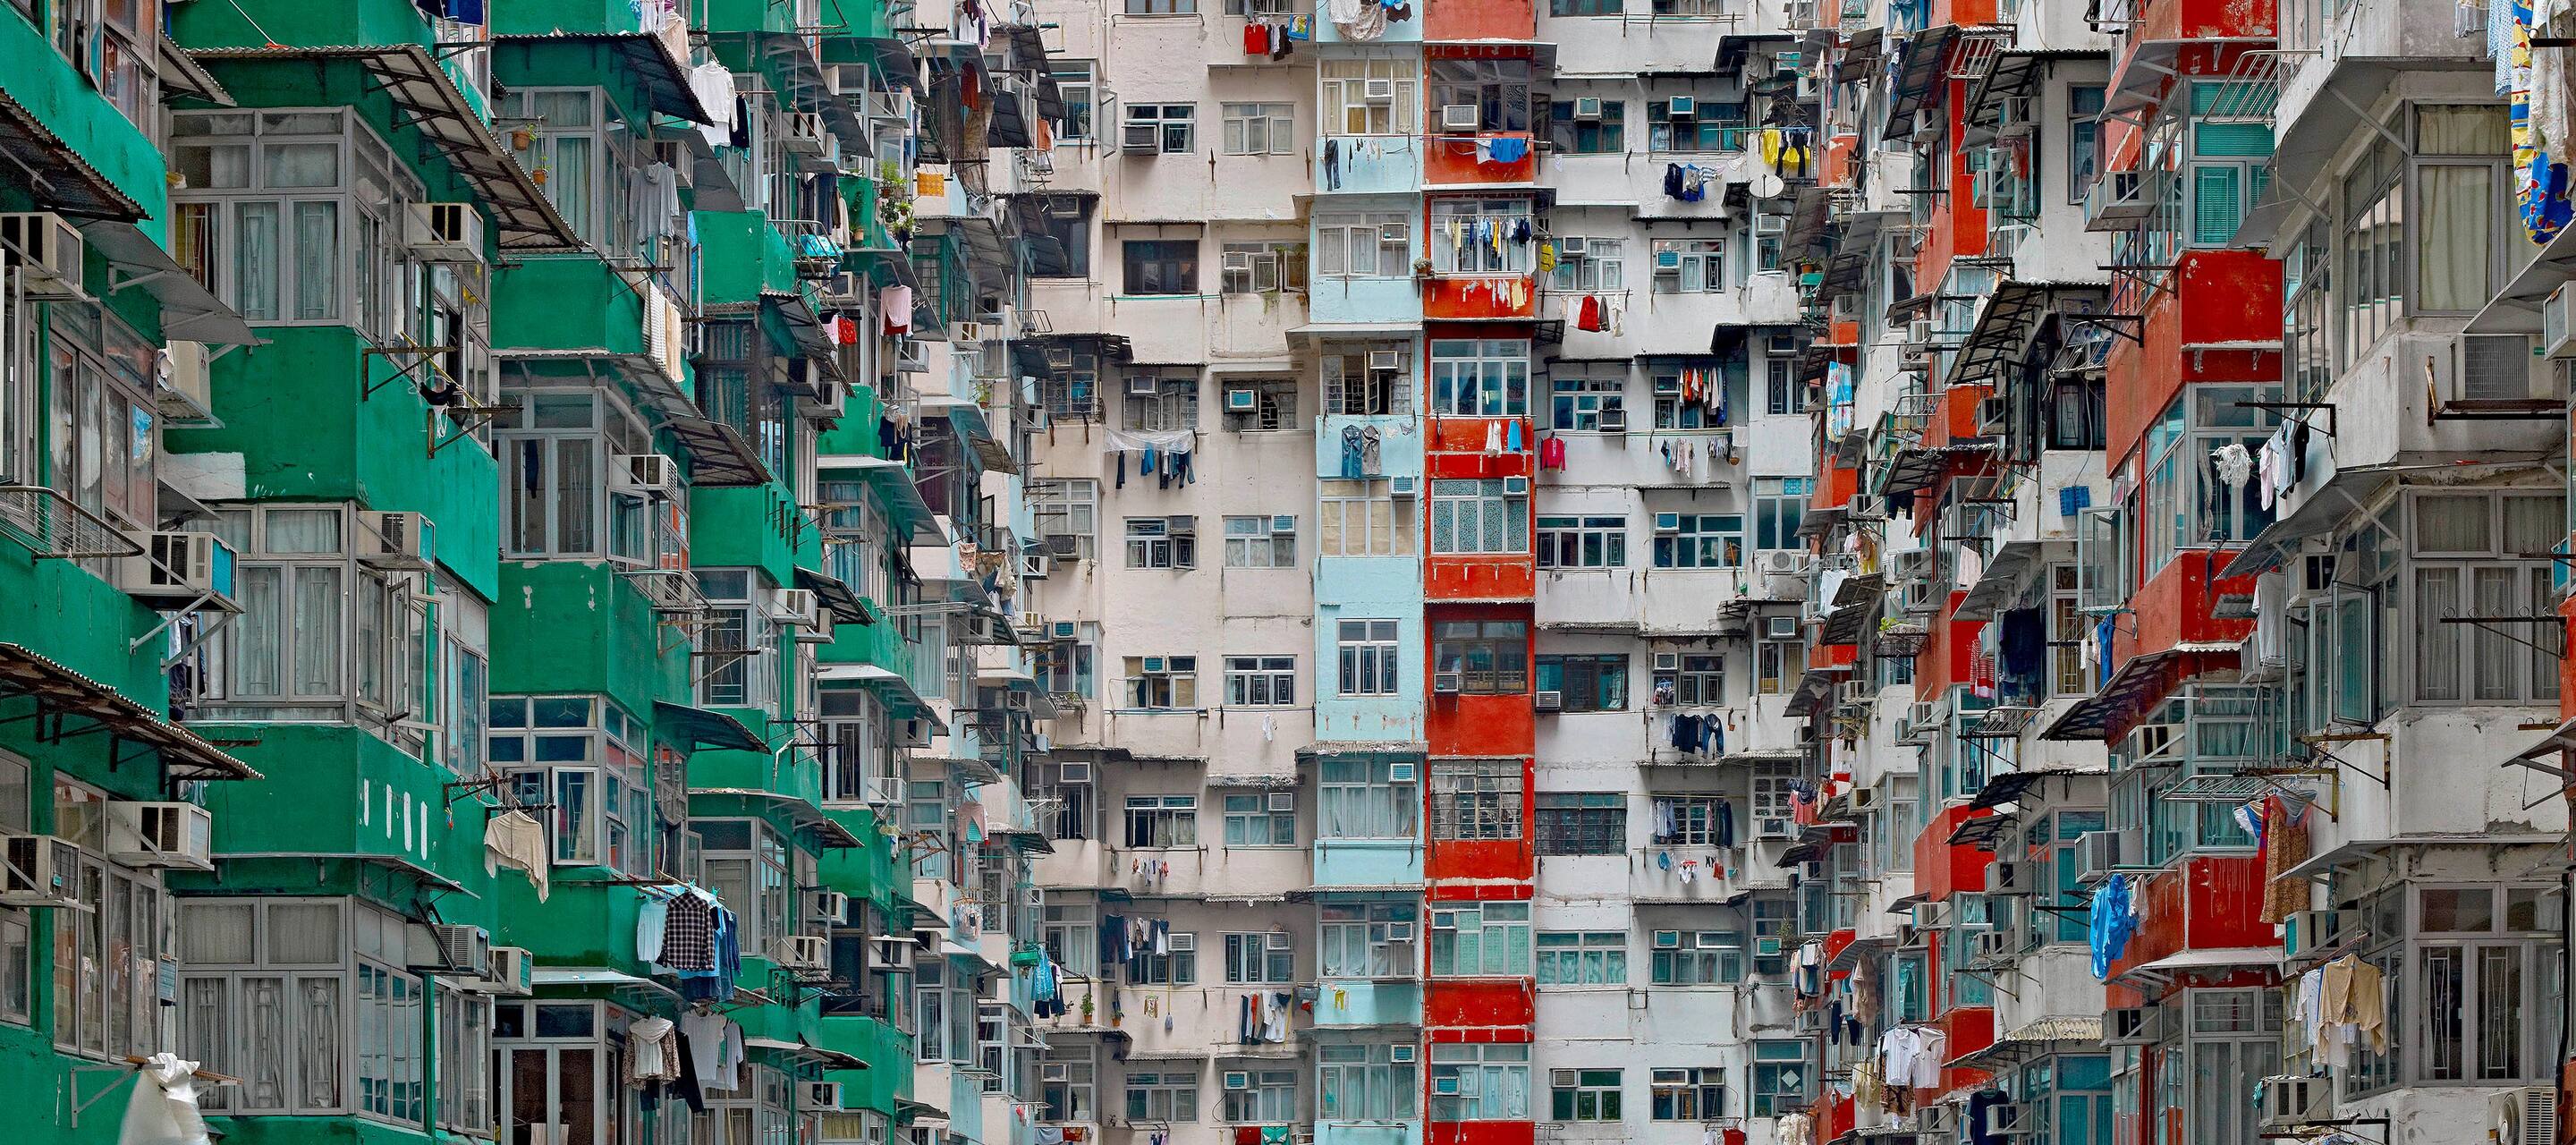 The multicoloured high-rise flats of Hong Kong with green, red and blue balconies